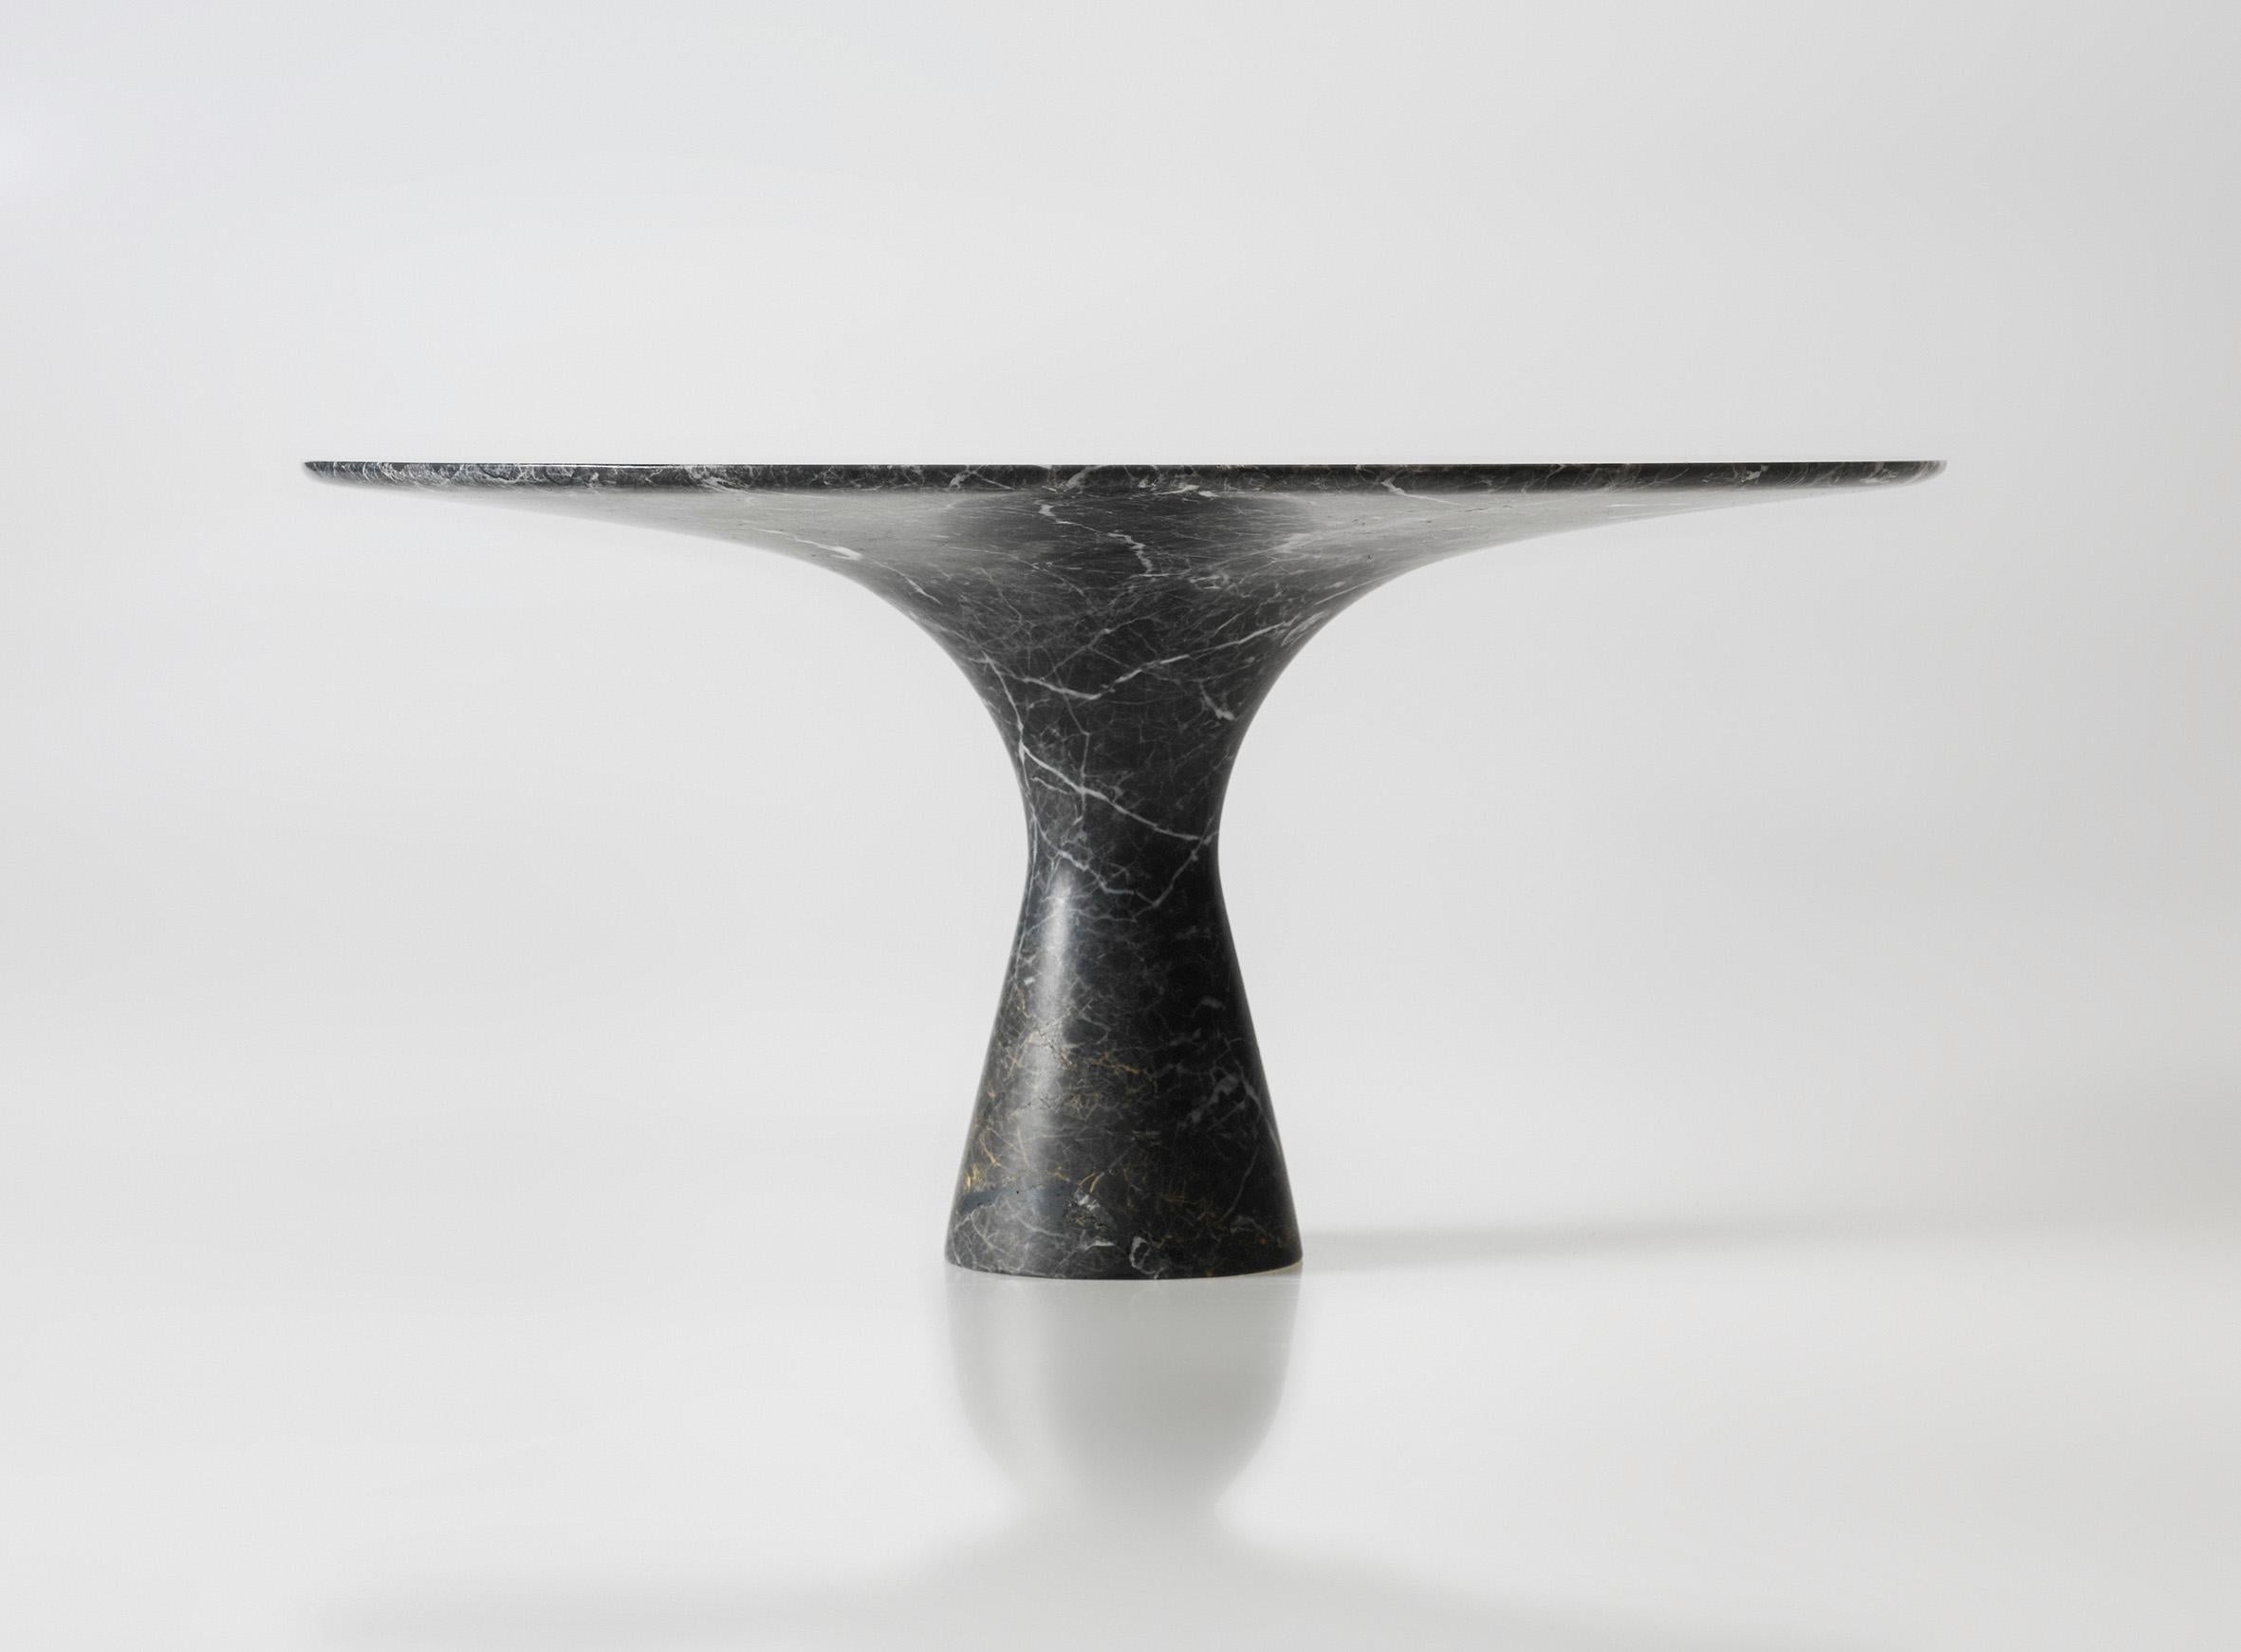 Grey Saint Laurent contemporary oval marble dining table 290/75
For 12 people
Dimensions: W 290 x D 160 x H 75 cm.
Materials: Grey Saint Laurent marble.

The collection consists of a round/oval dining or conference table, side tables and lower